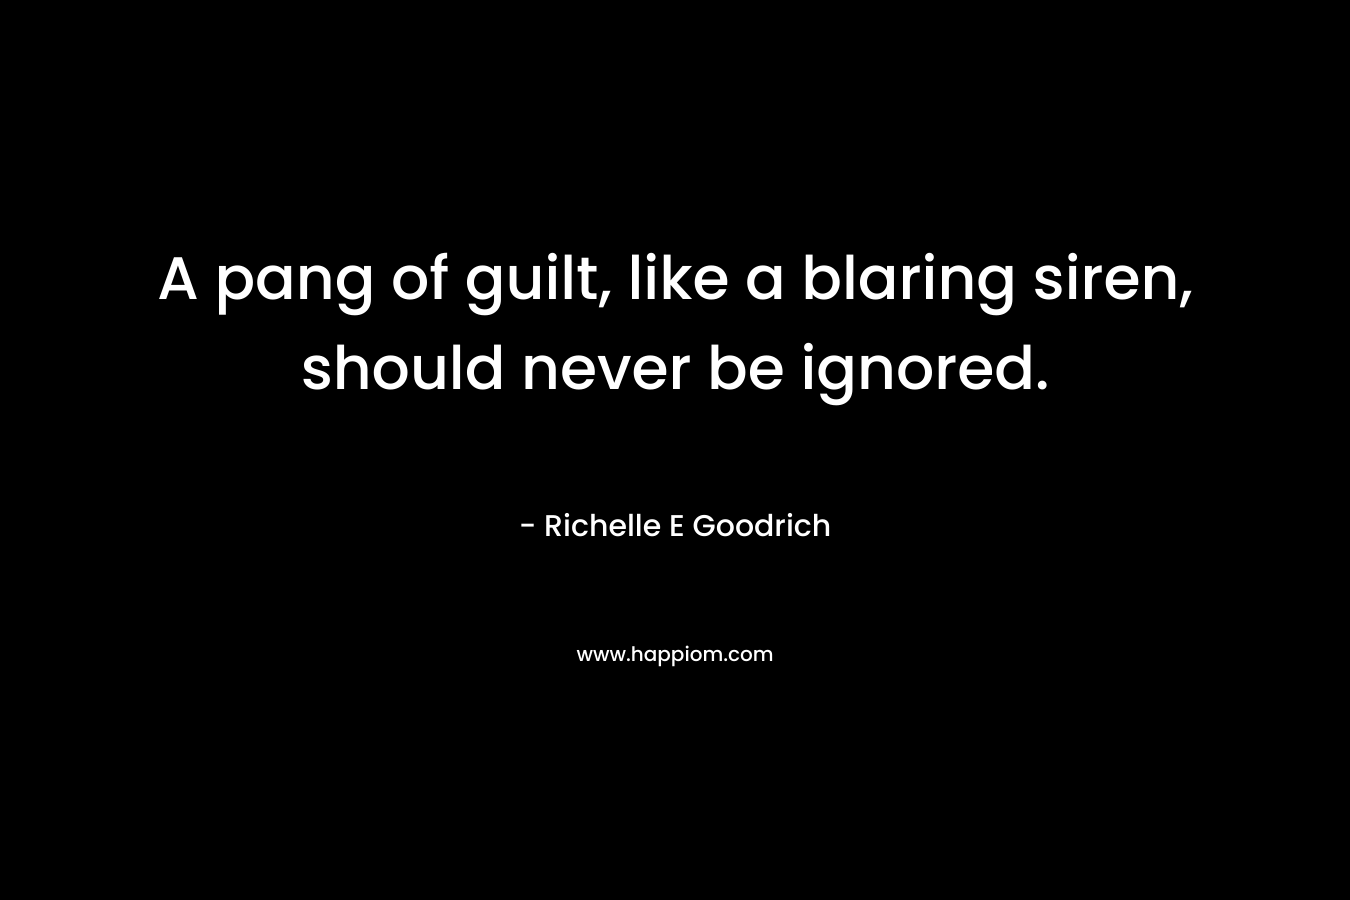 A pang of guilt, like a blaring siren, should never be ignored. – Richelle E Goodrich